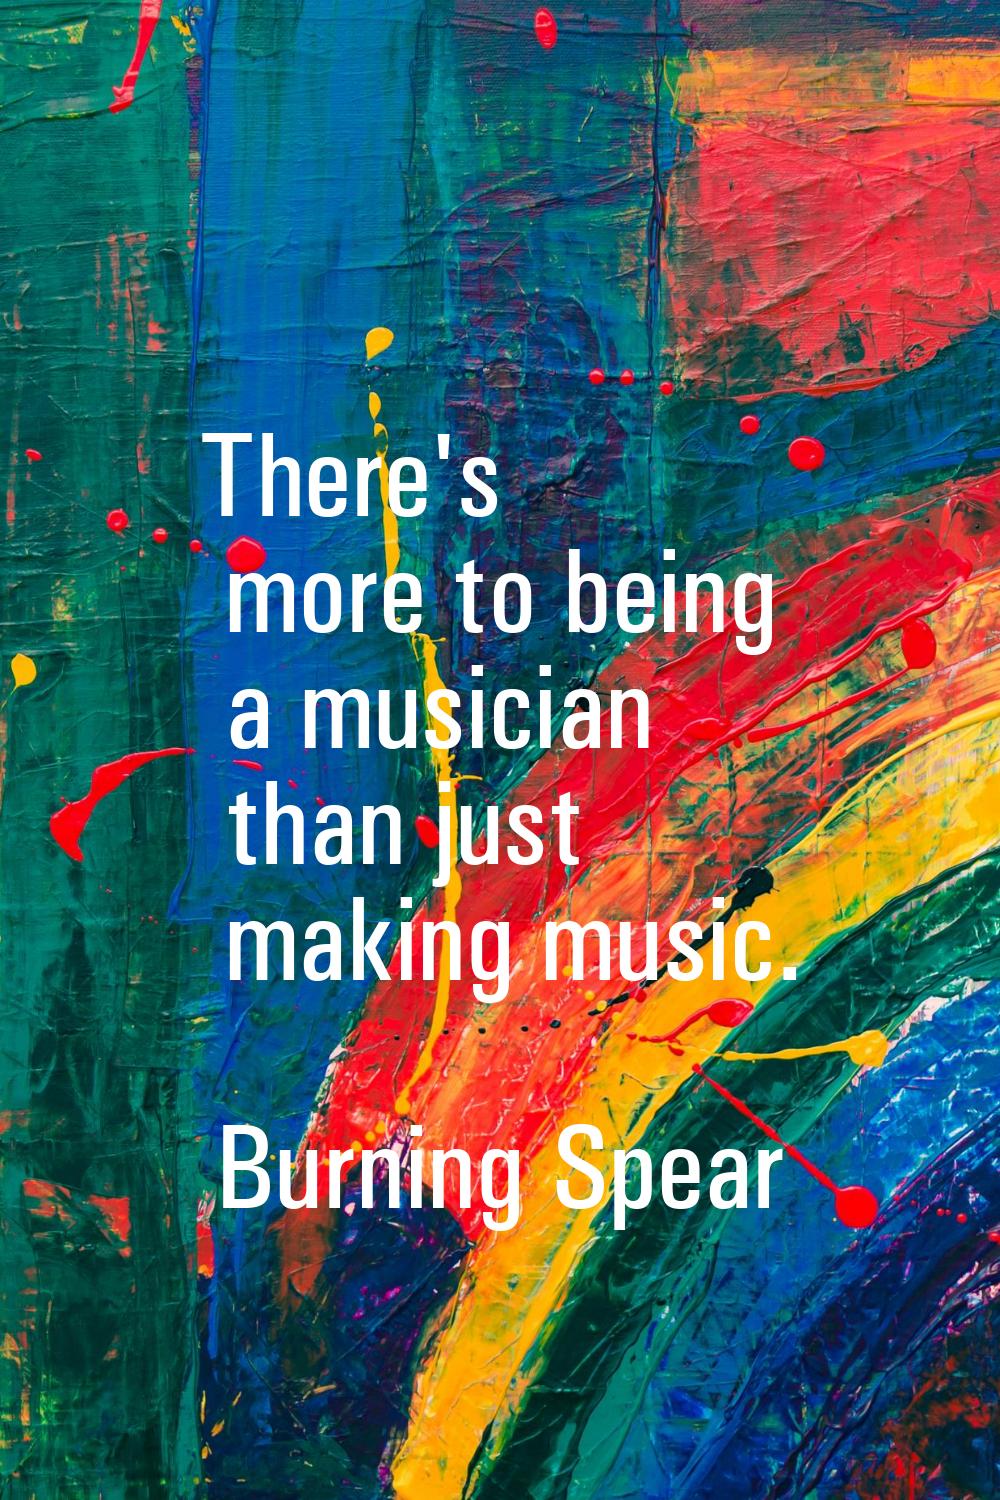 There's more to being a musician than just making music.